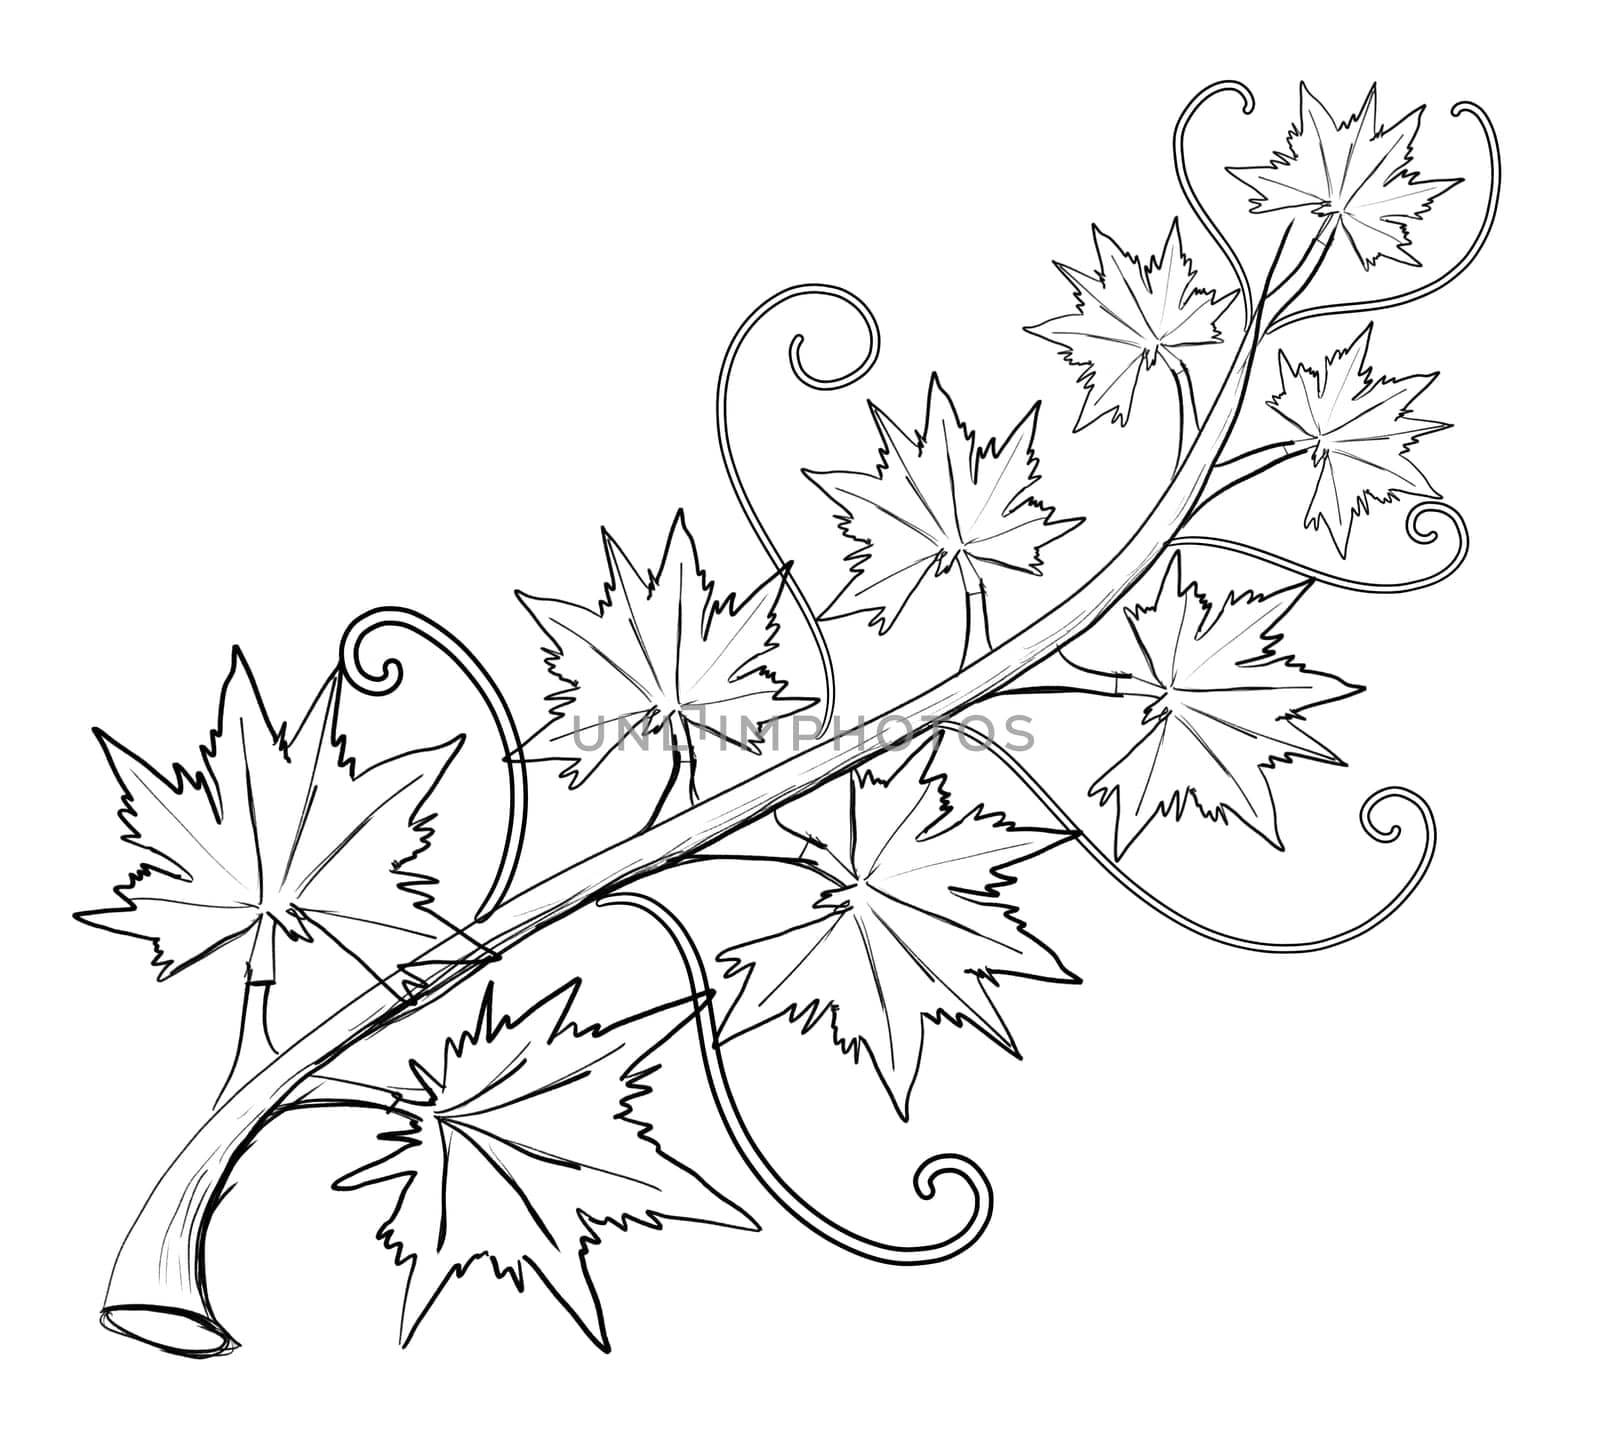 pumpkin leaf vine hand drawn lines on Halloween day On a white background, isolate by sarayut_thaneerat